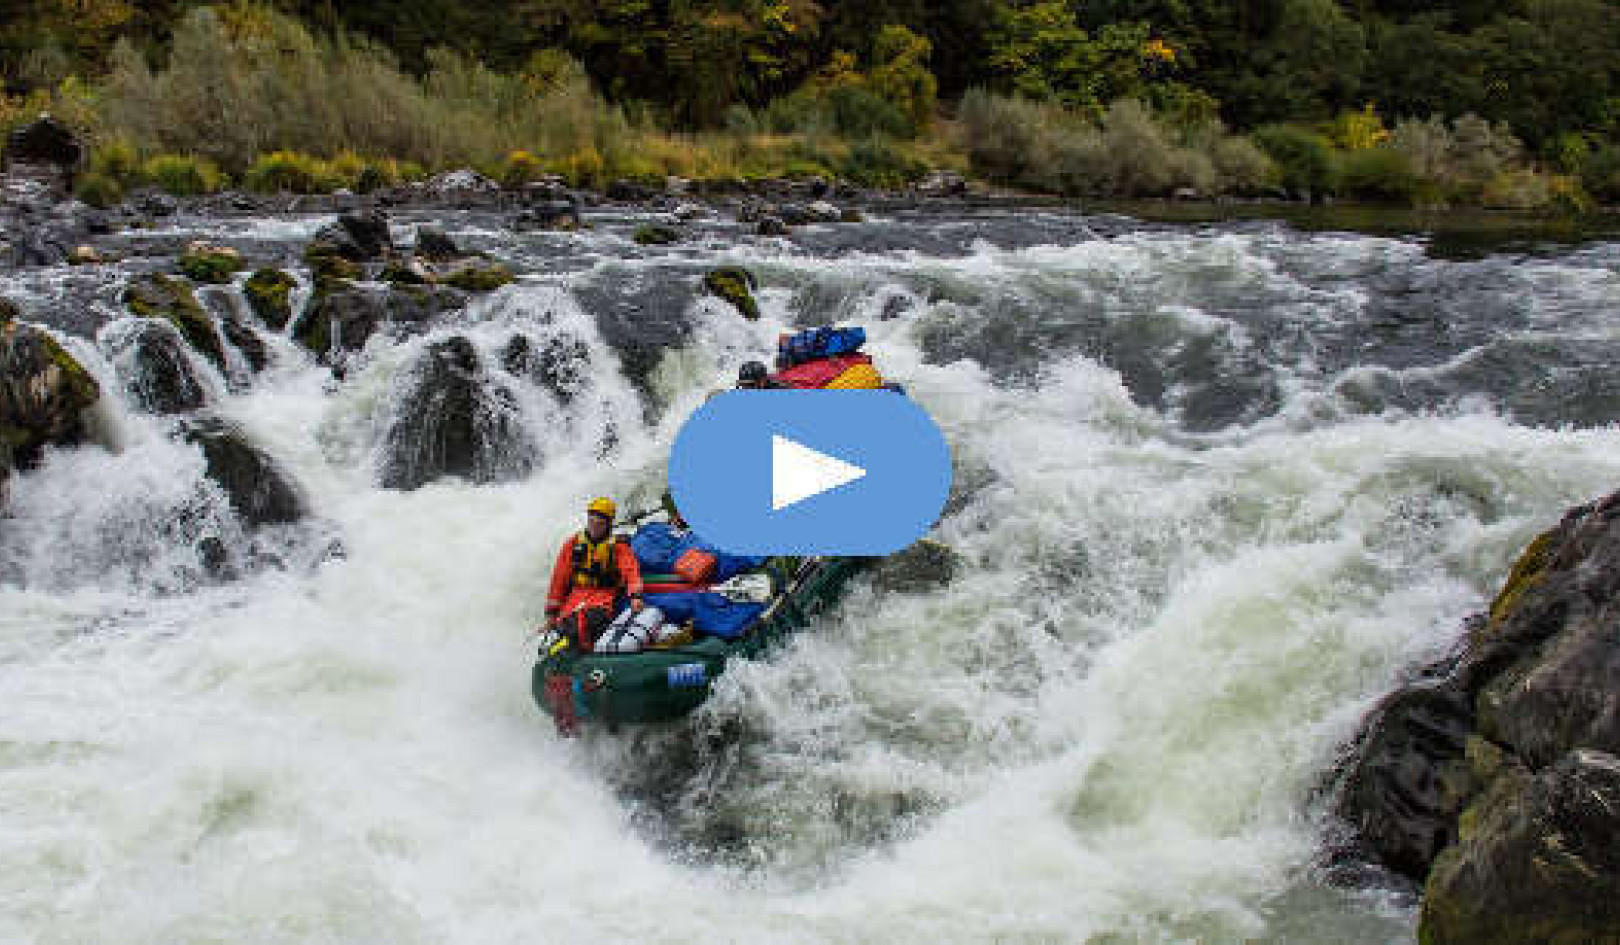 The Power of Powerlessness: Riding the Rapids of Life (Video)